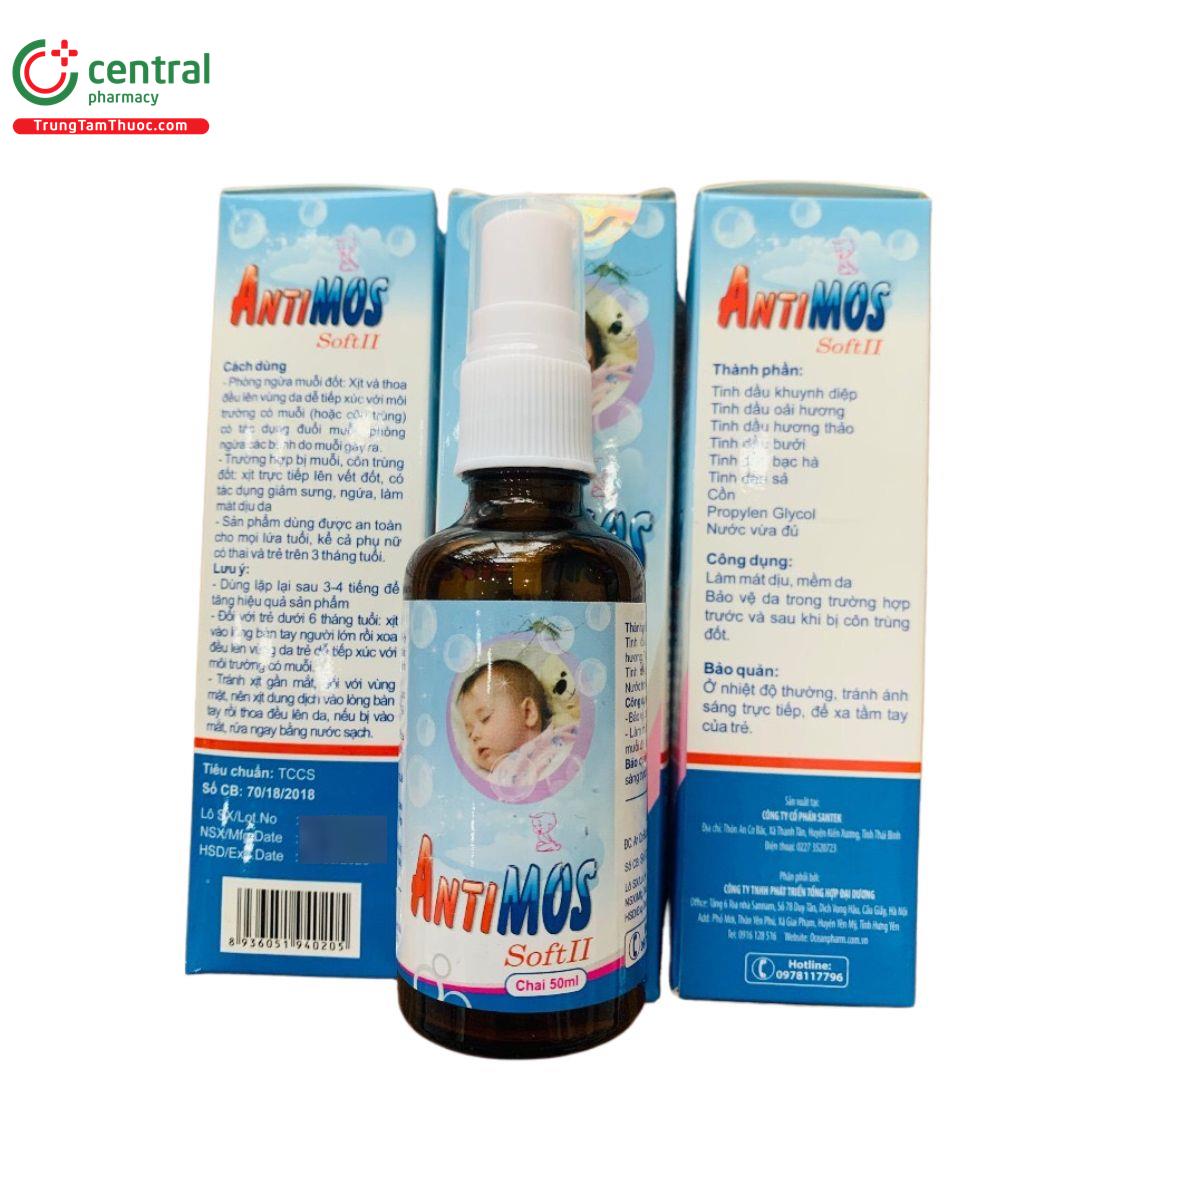 xit chong muoi antimos soft ii 3 F2747